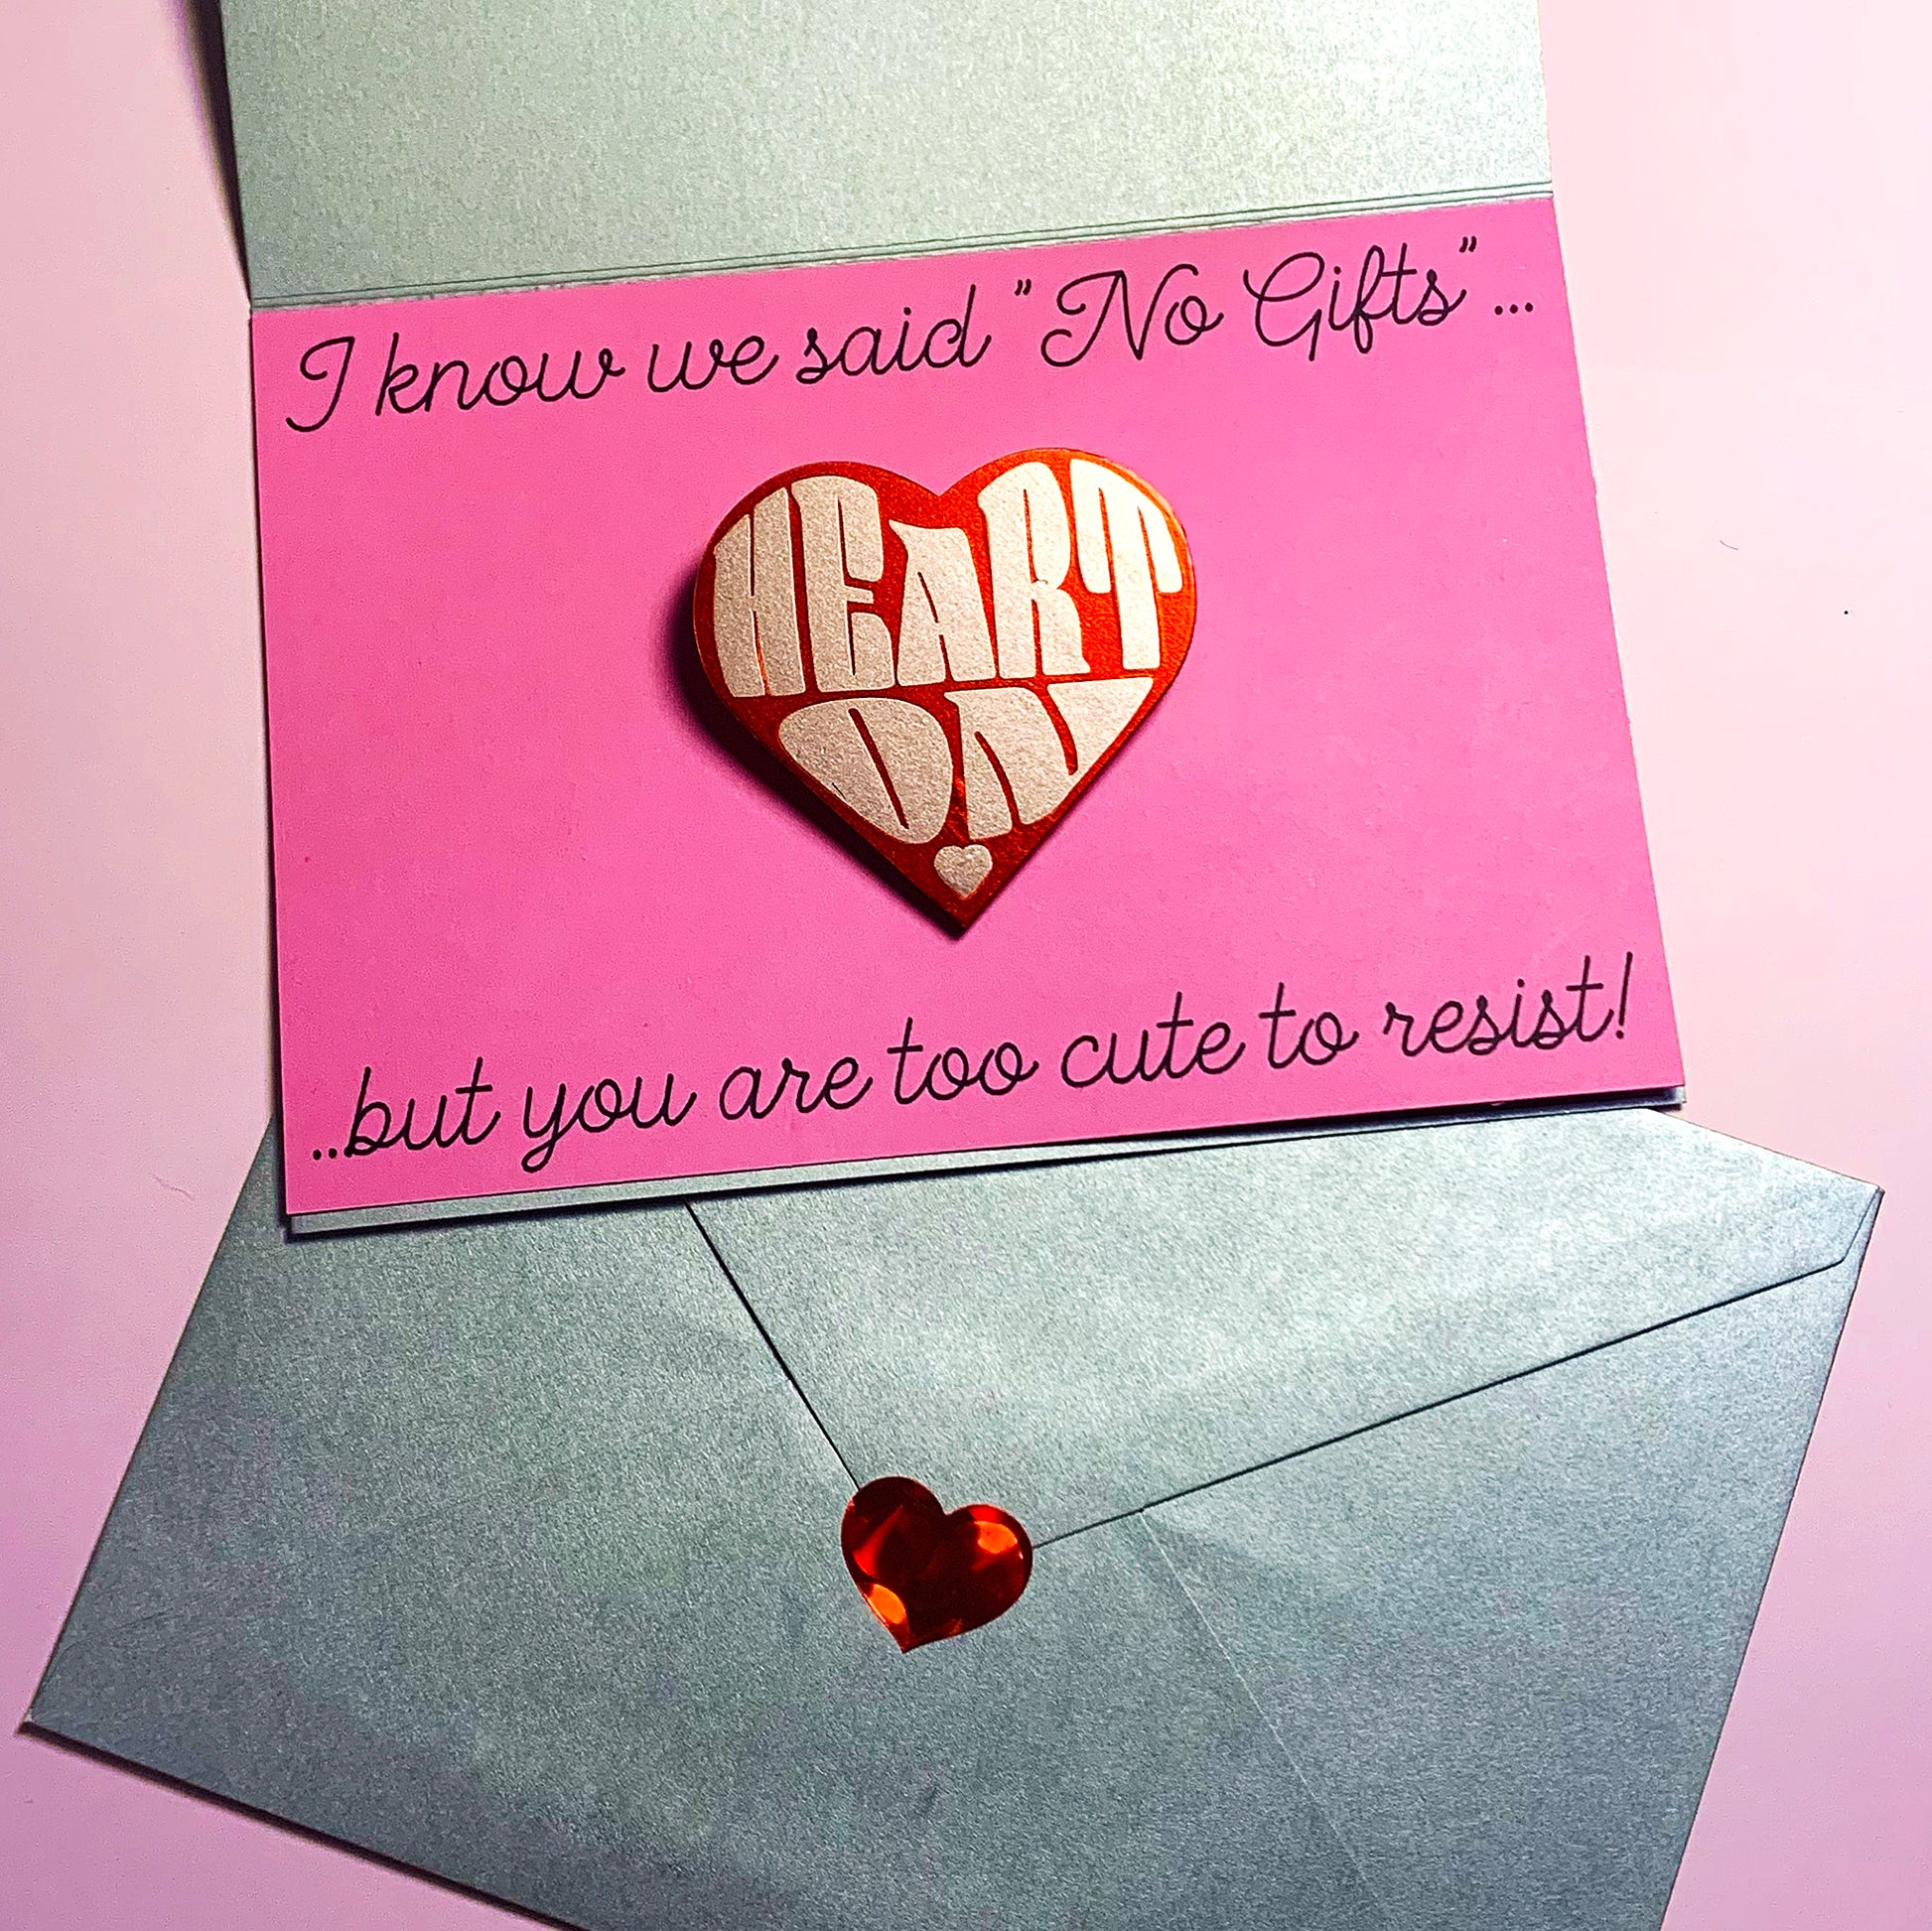 "Heart On" heart-shaped pin - metallic pink & red option, packaged with personal message "I know we said No Gifts, but you are too cute to resist!" machine-written on pink & silver card, envelope set